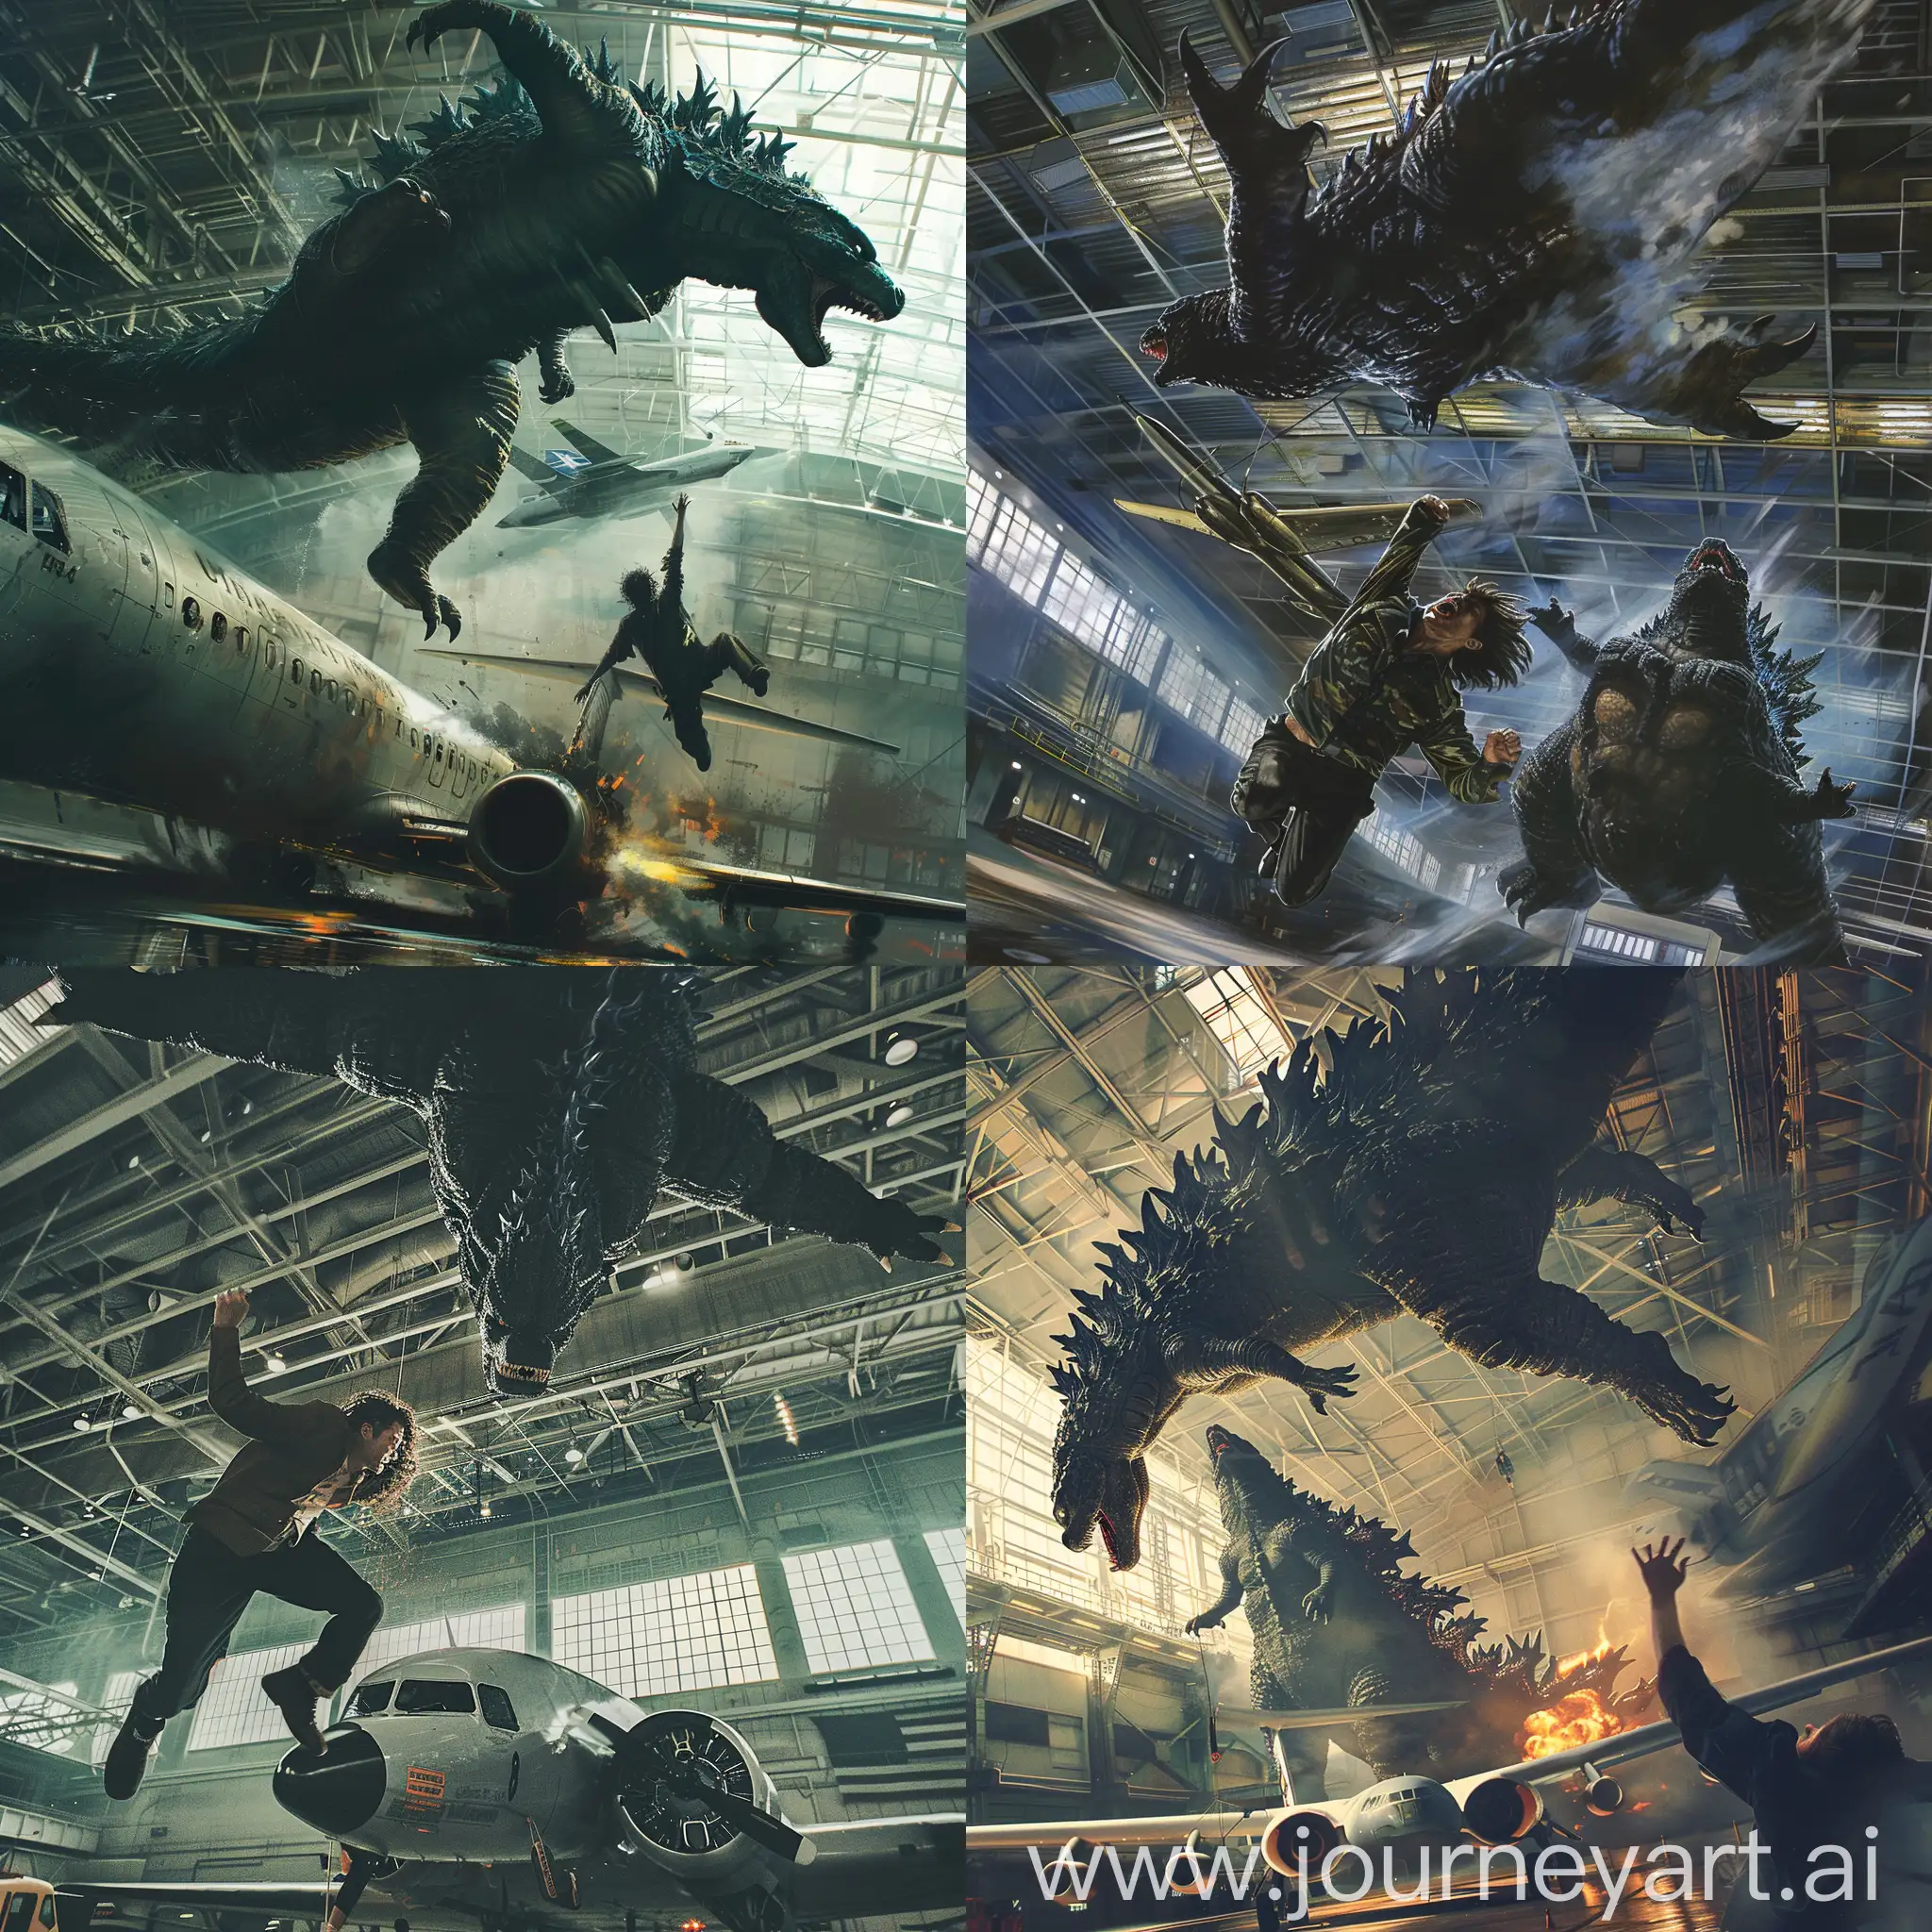 Unhinged insane man running upside down on the ceiling of an airplane hangar being chased by Godzilla in a plane